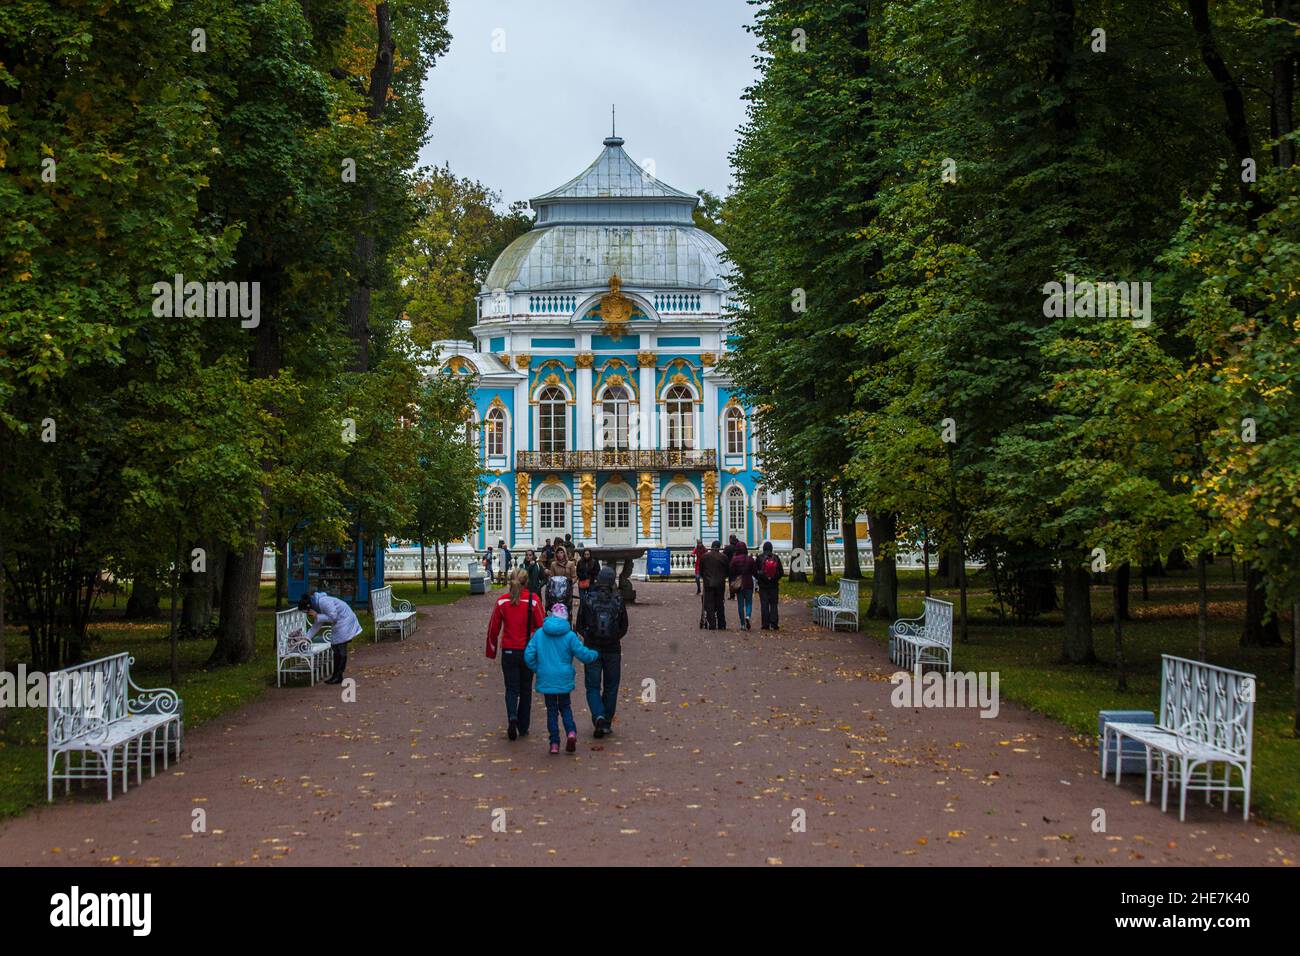 Tsarskoe Selo, Russia - View of a palace in the residence park Stock Photo